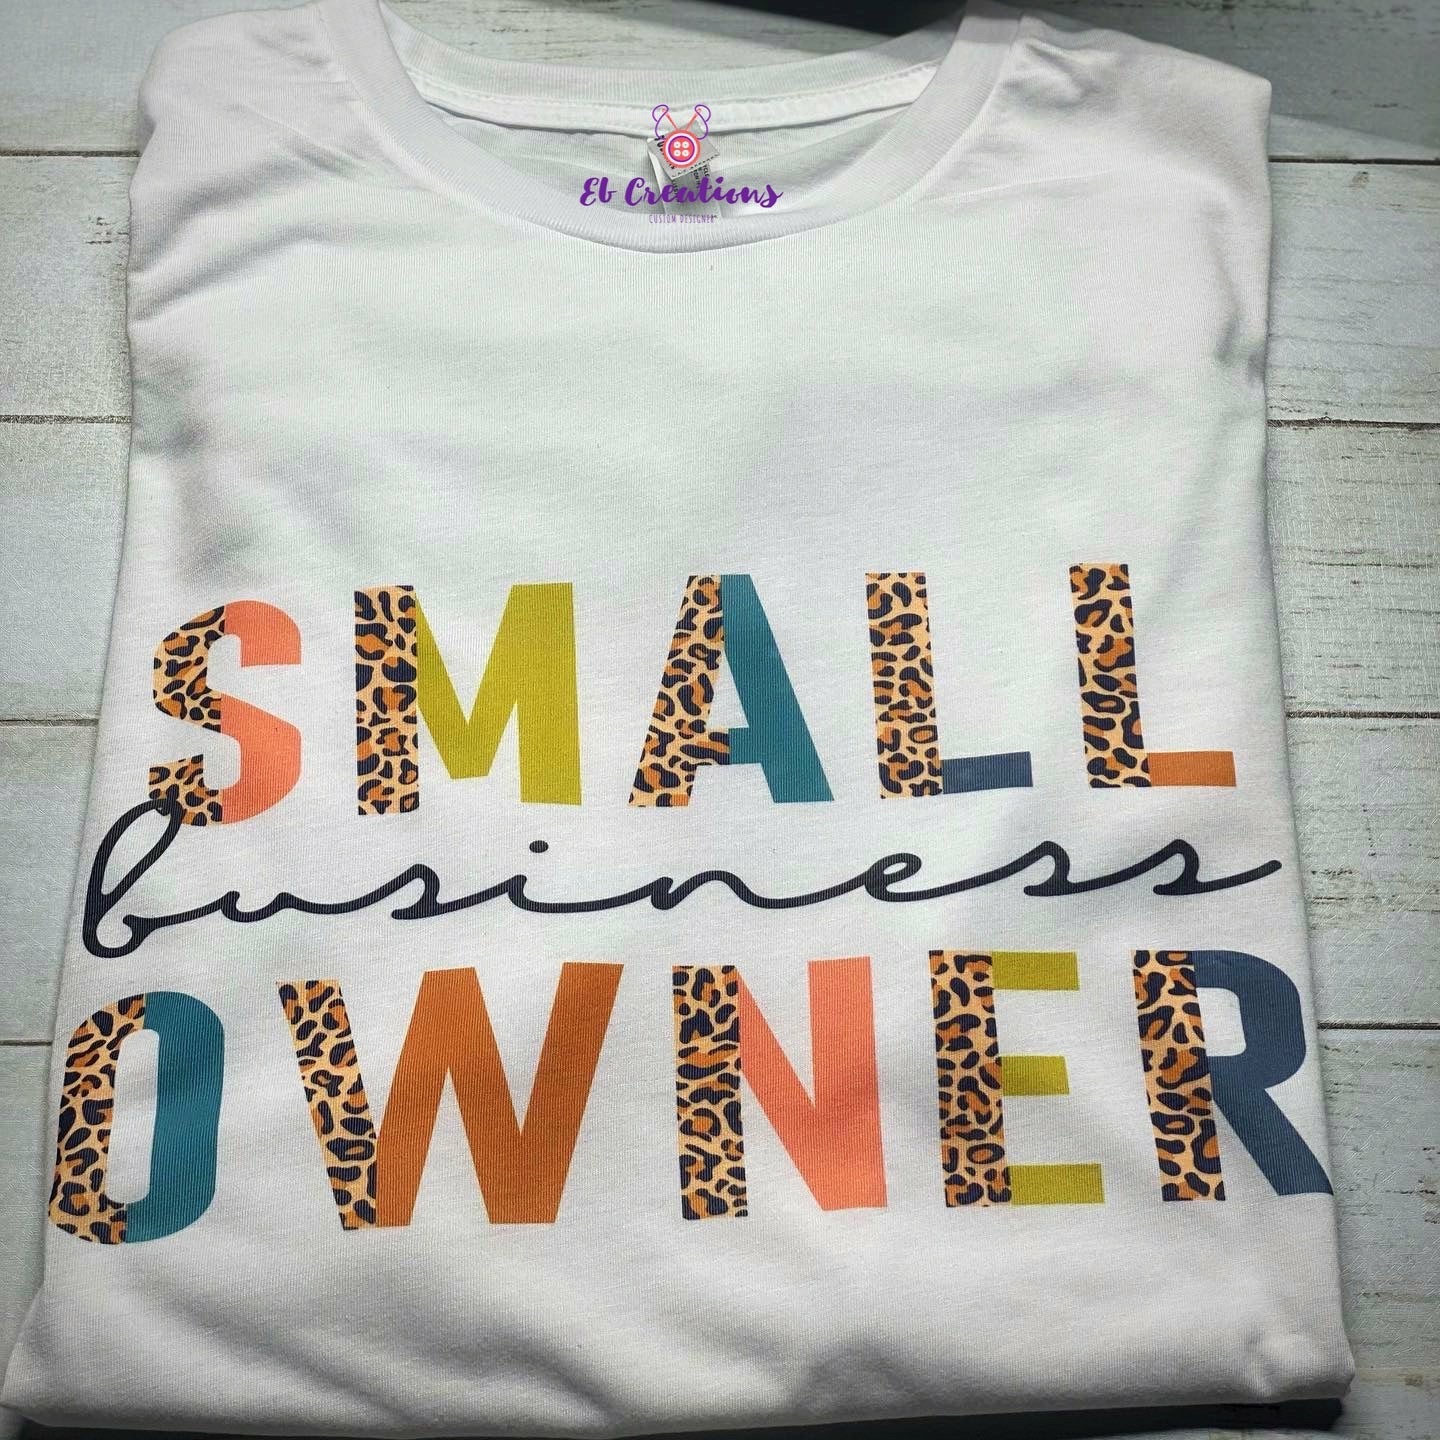 Small Business Owner | T-Shirt - Eb Creations Small Business Owner | T-Shirt